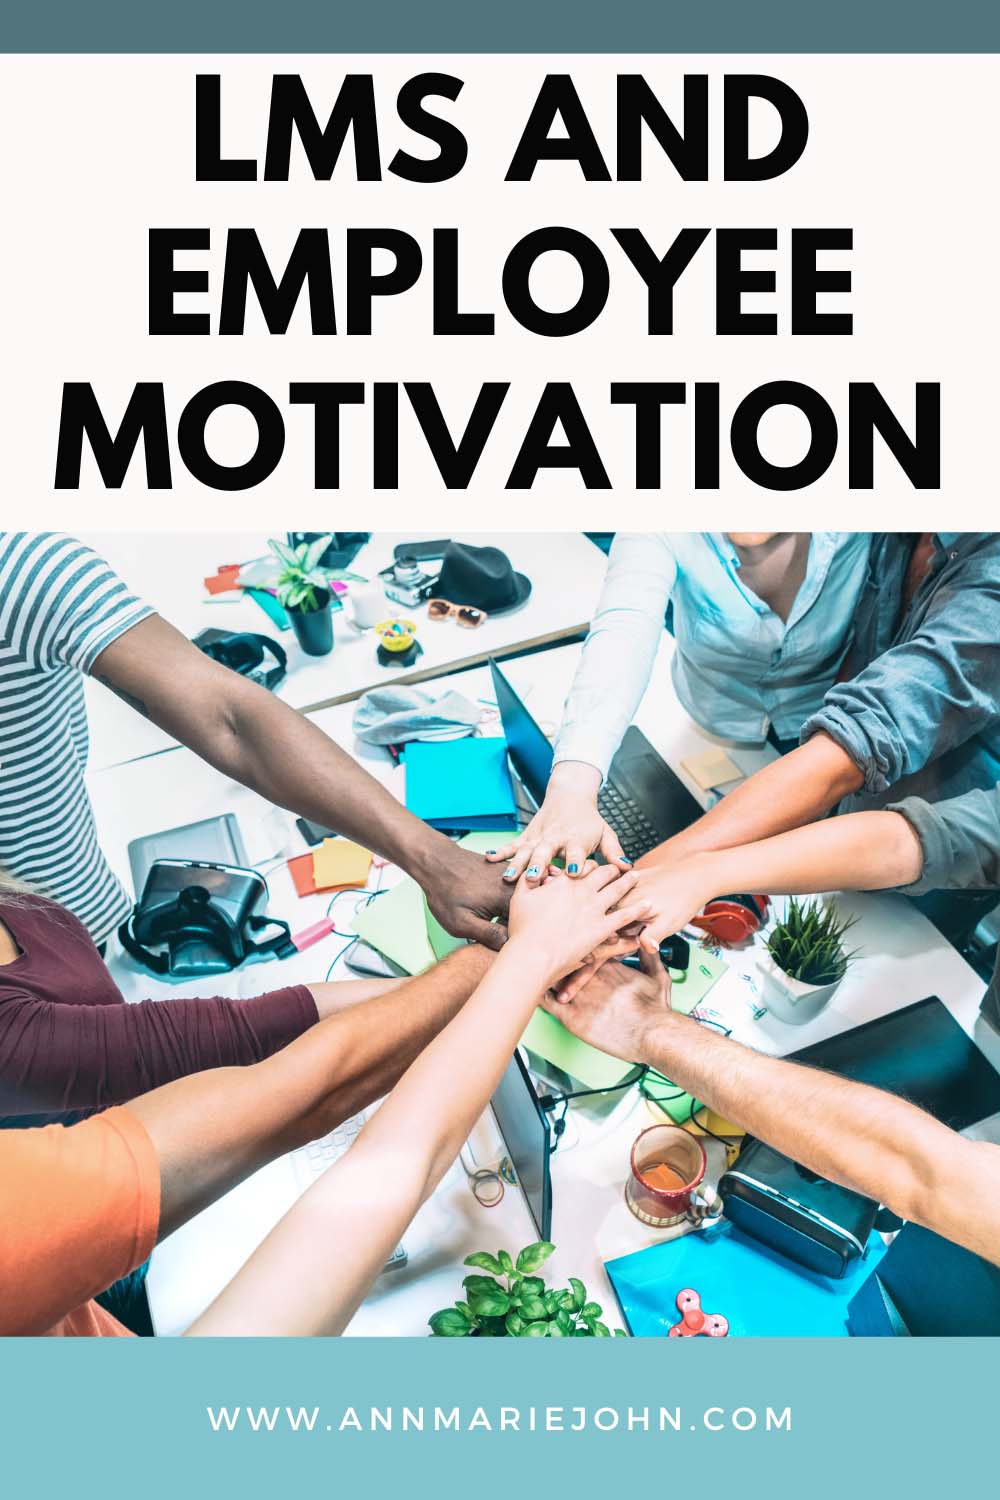 LMS And Employee Motivation